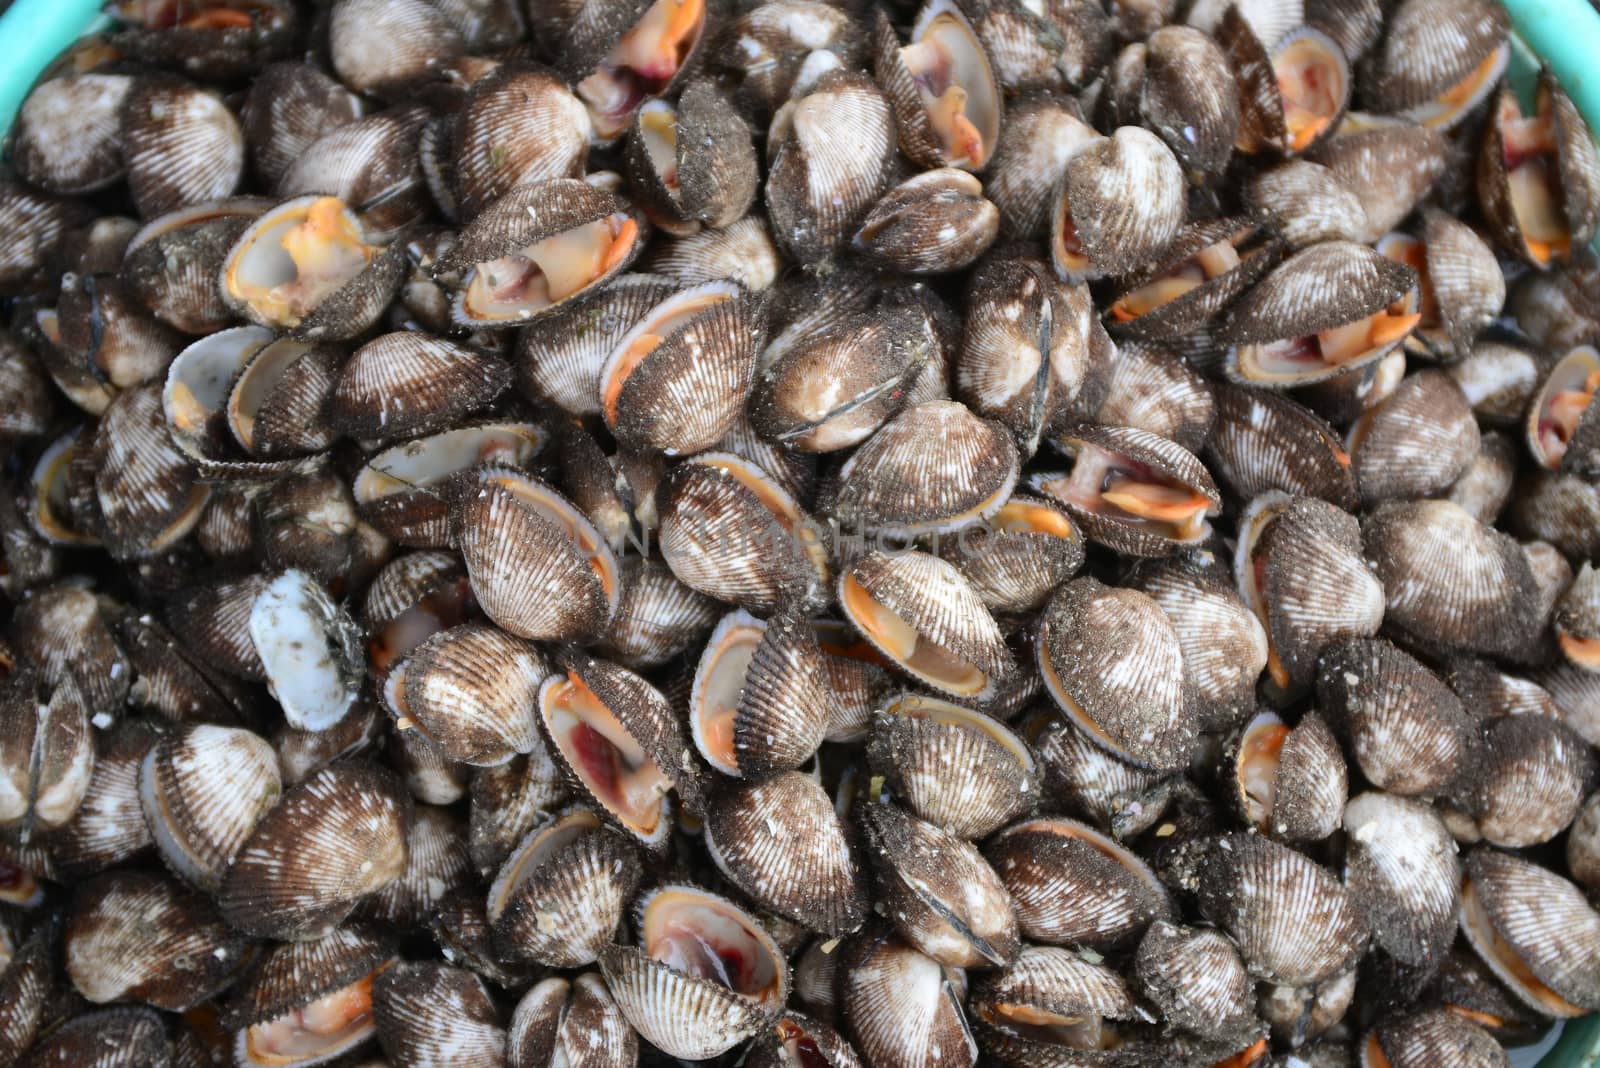 fresh Anadara inaequivalvis Sell in fresh seafood market, note  select focus with shallow depth of field